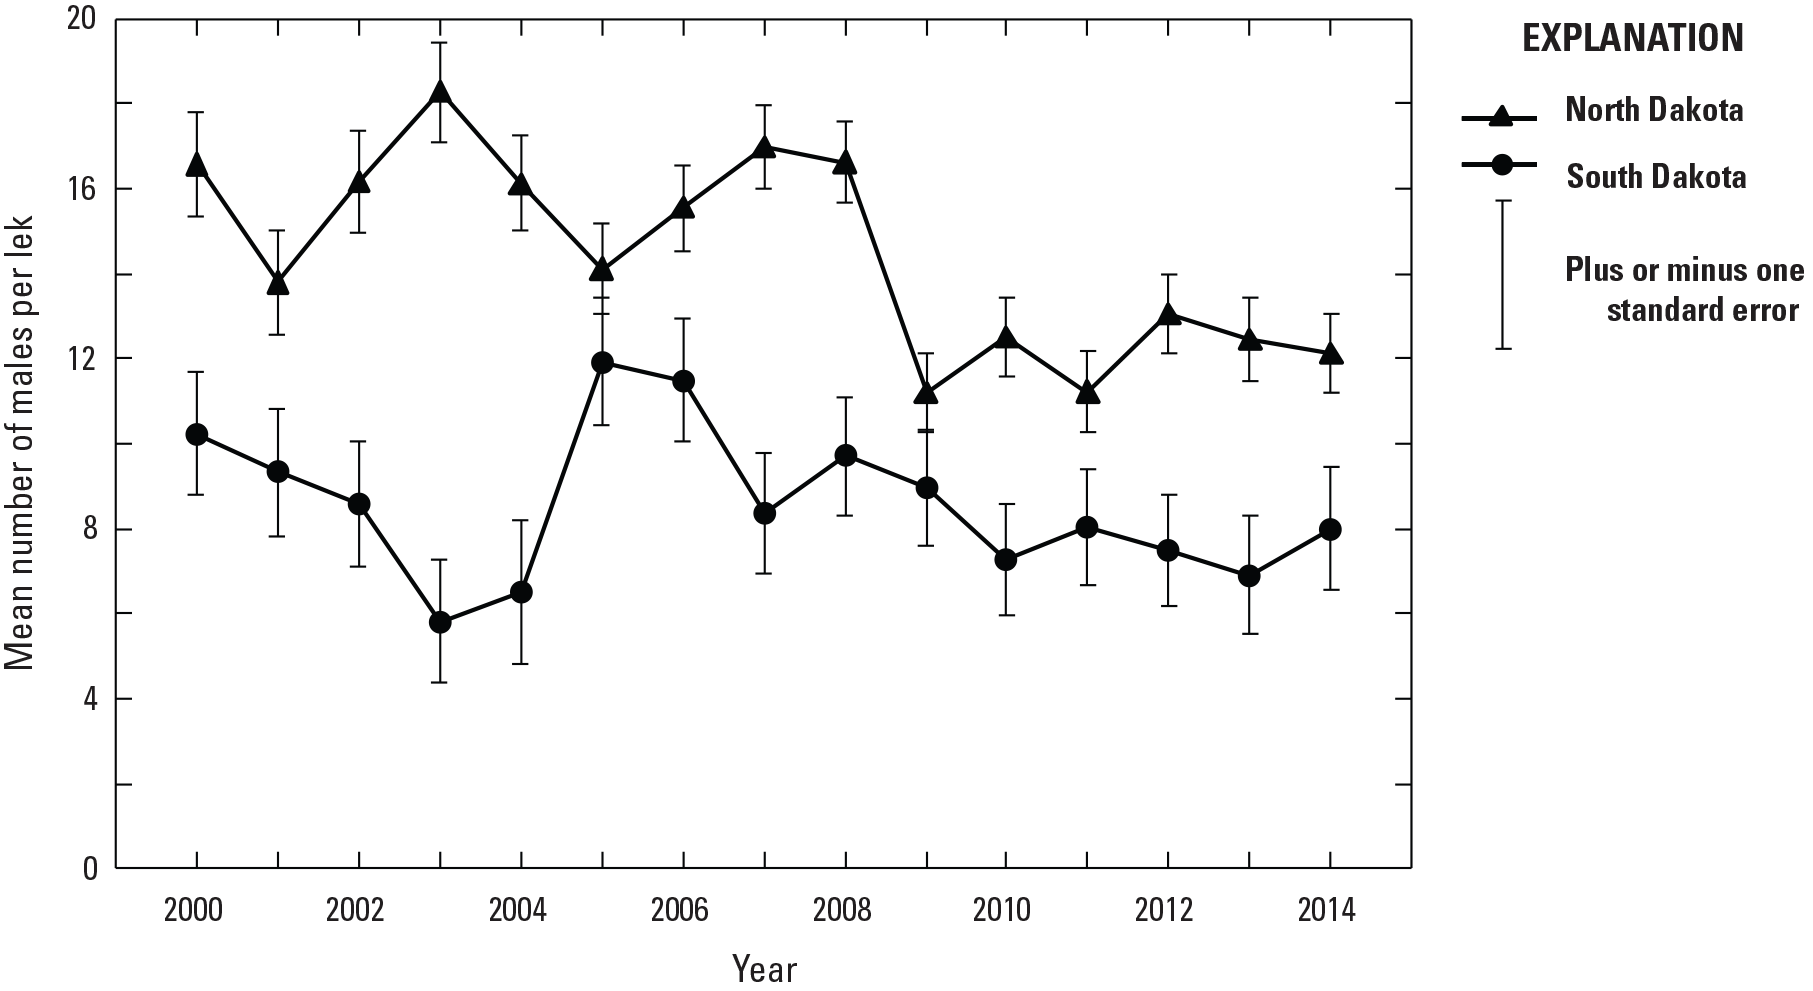 Mean number of sharp-tailed grouse males per lek is higher is North Dakota than South
                        Dakota